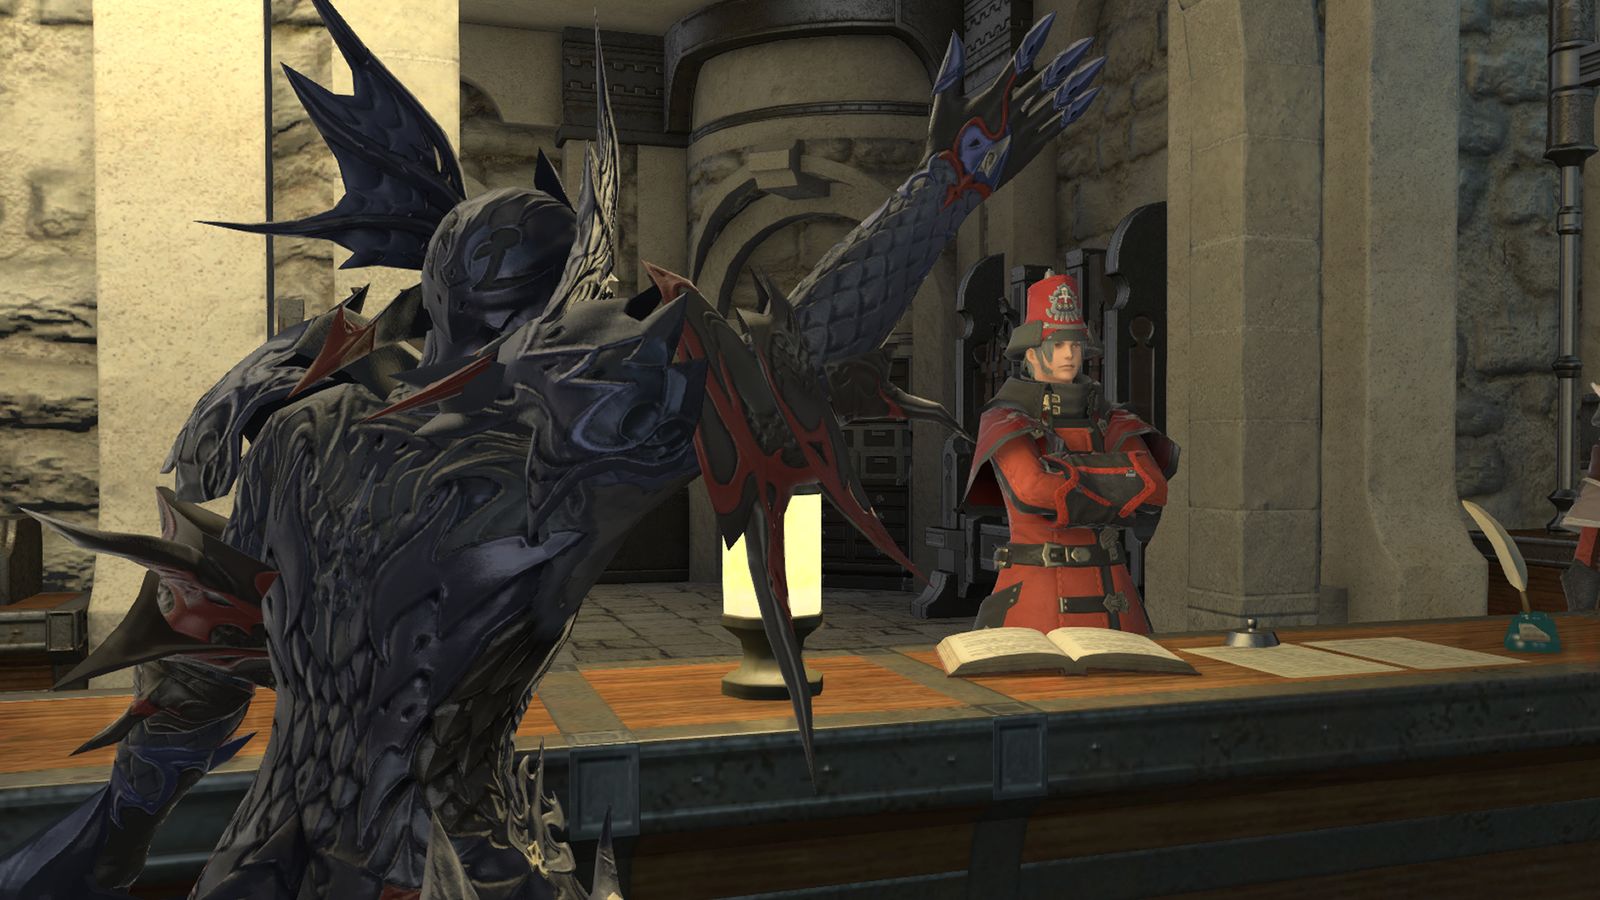 An image of a Dragoon from Final Fantasy XIV preparing to turn in Grand Company Seals for the next step in his Anima Lux Relic Weapon questline from Heavensward. 